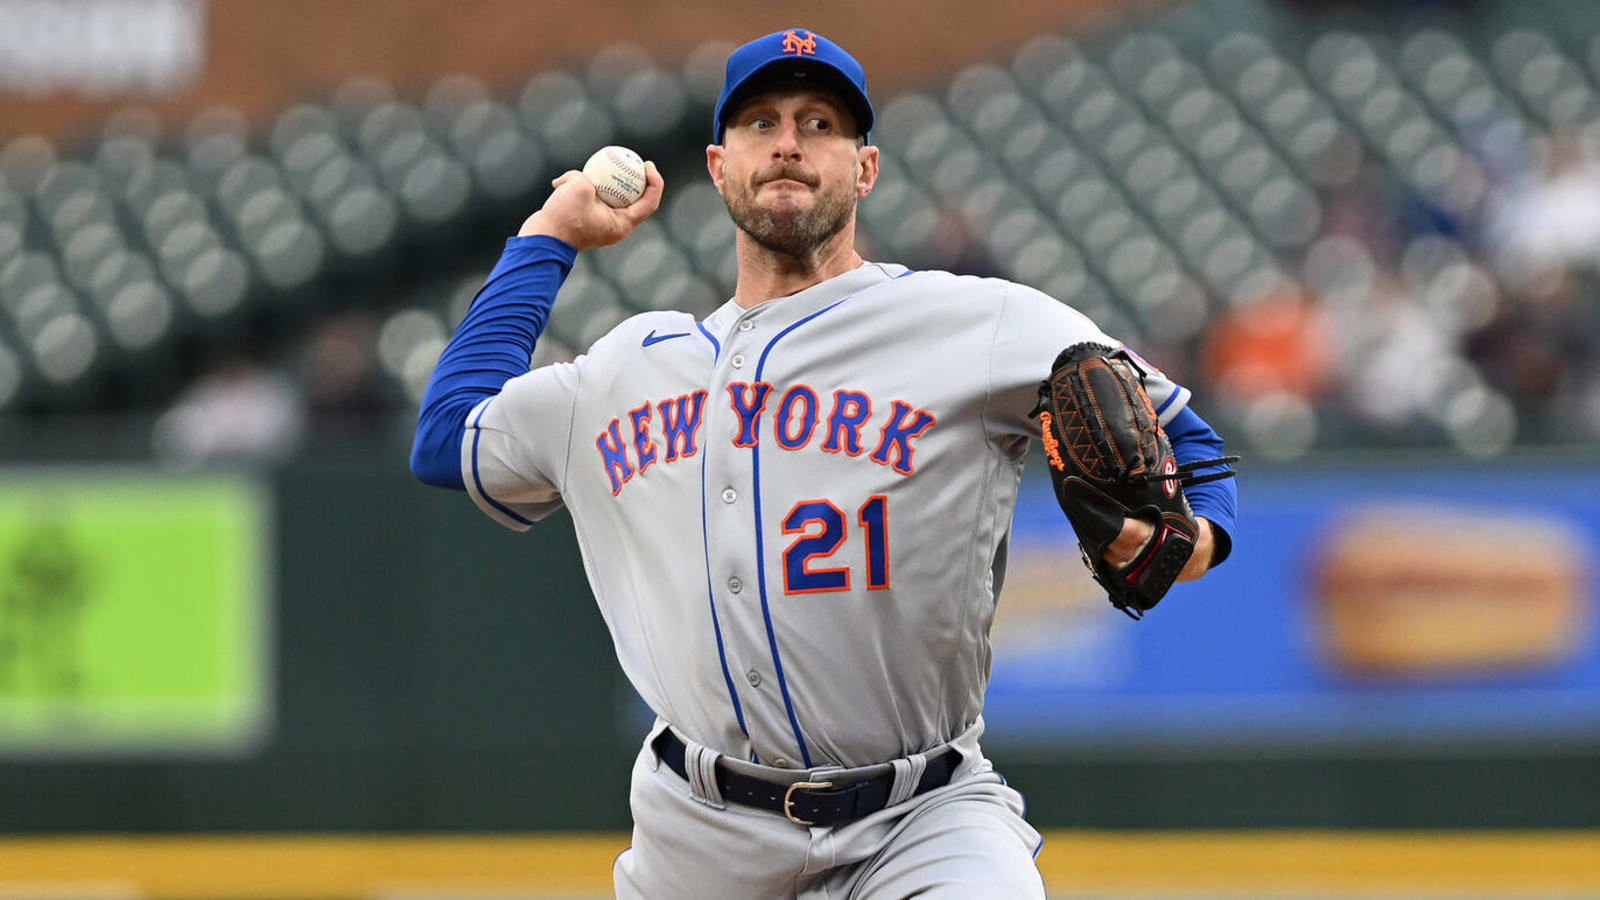 New concerning update on Mets ace emerges